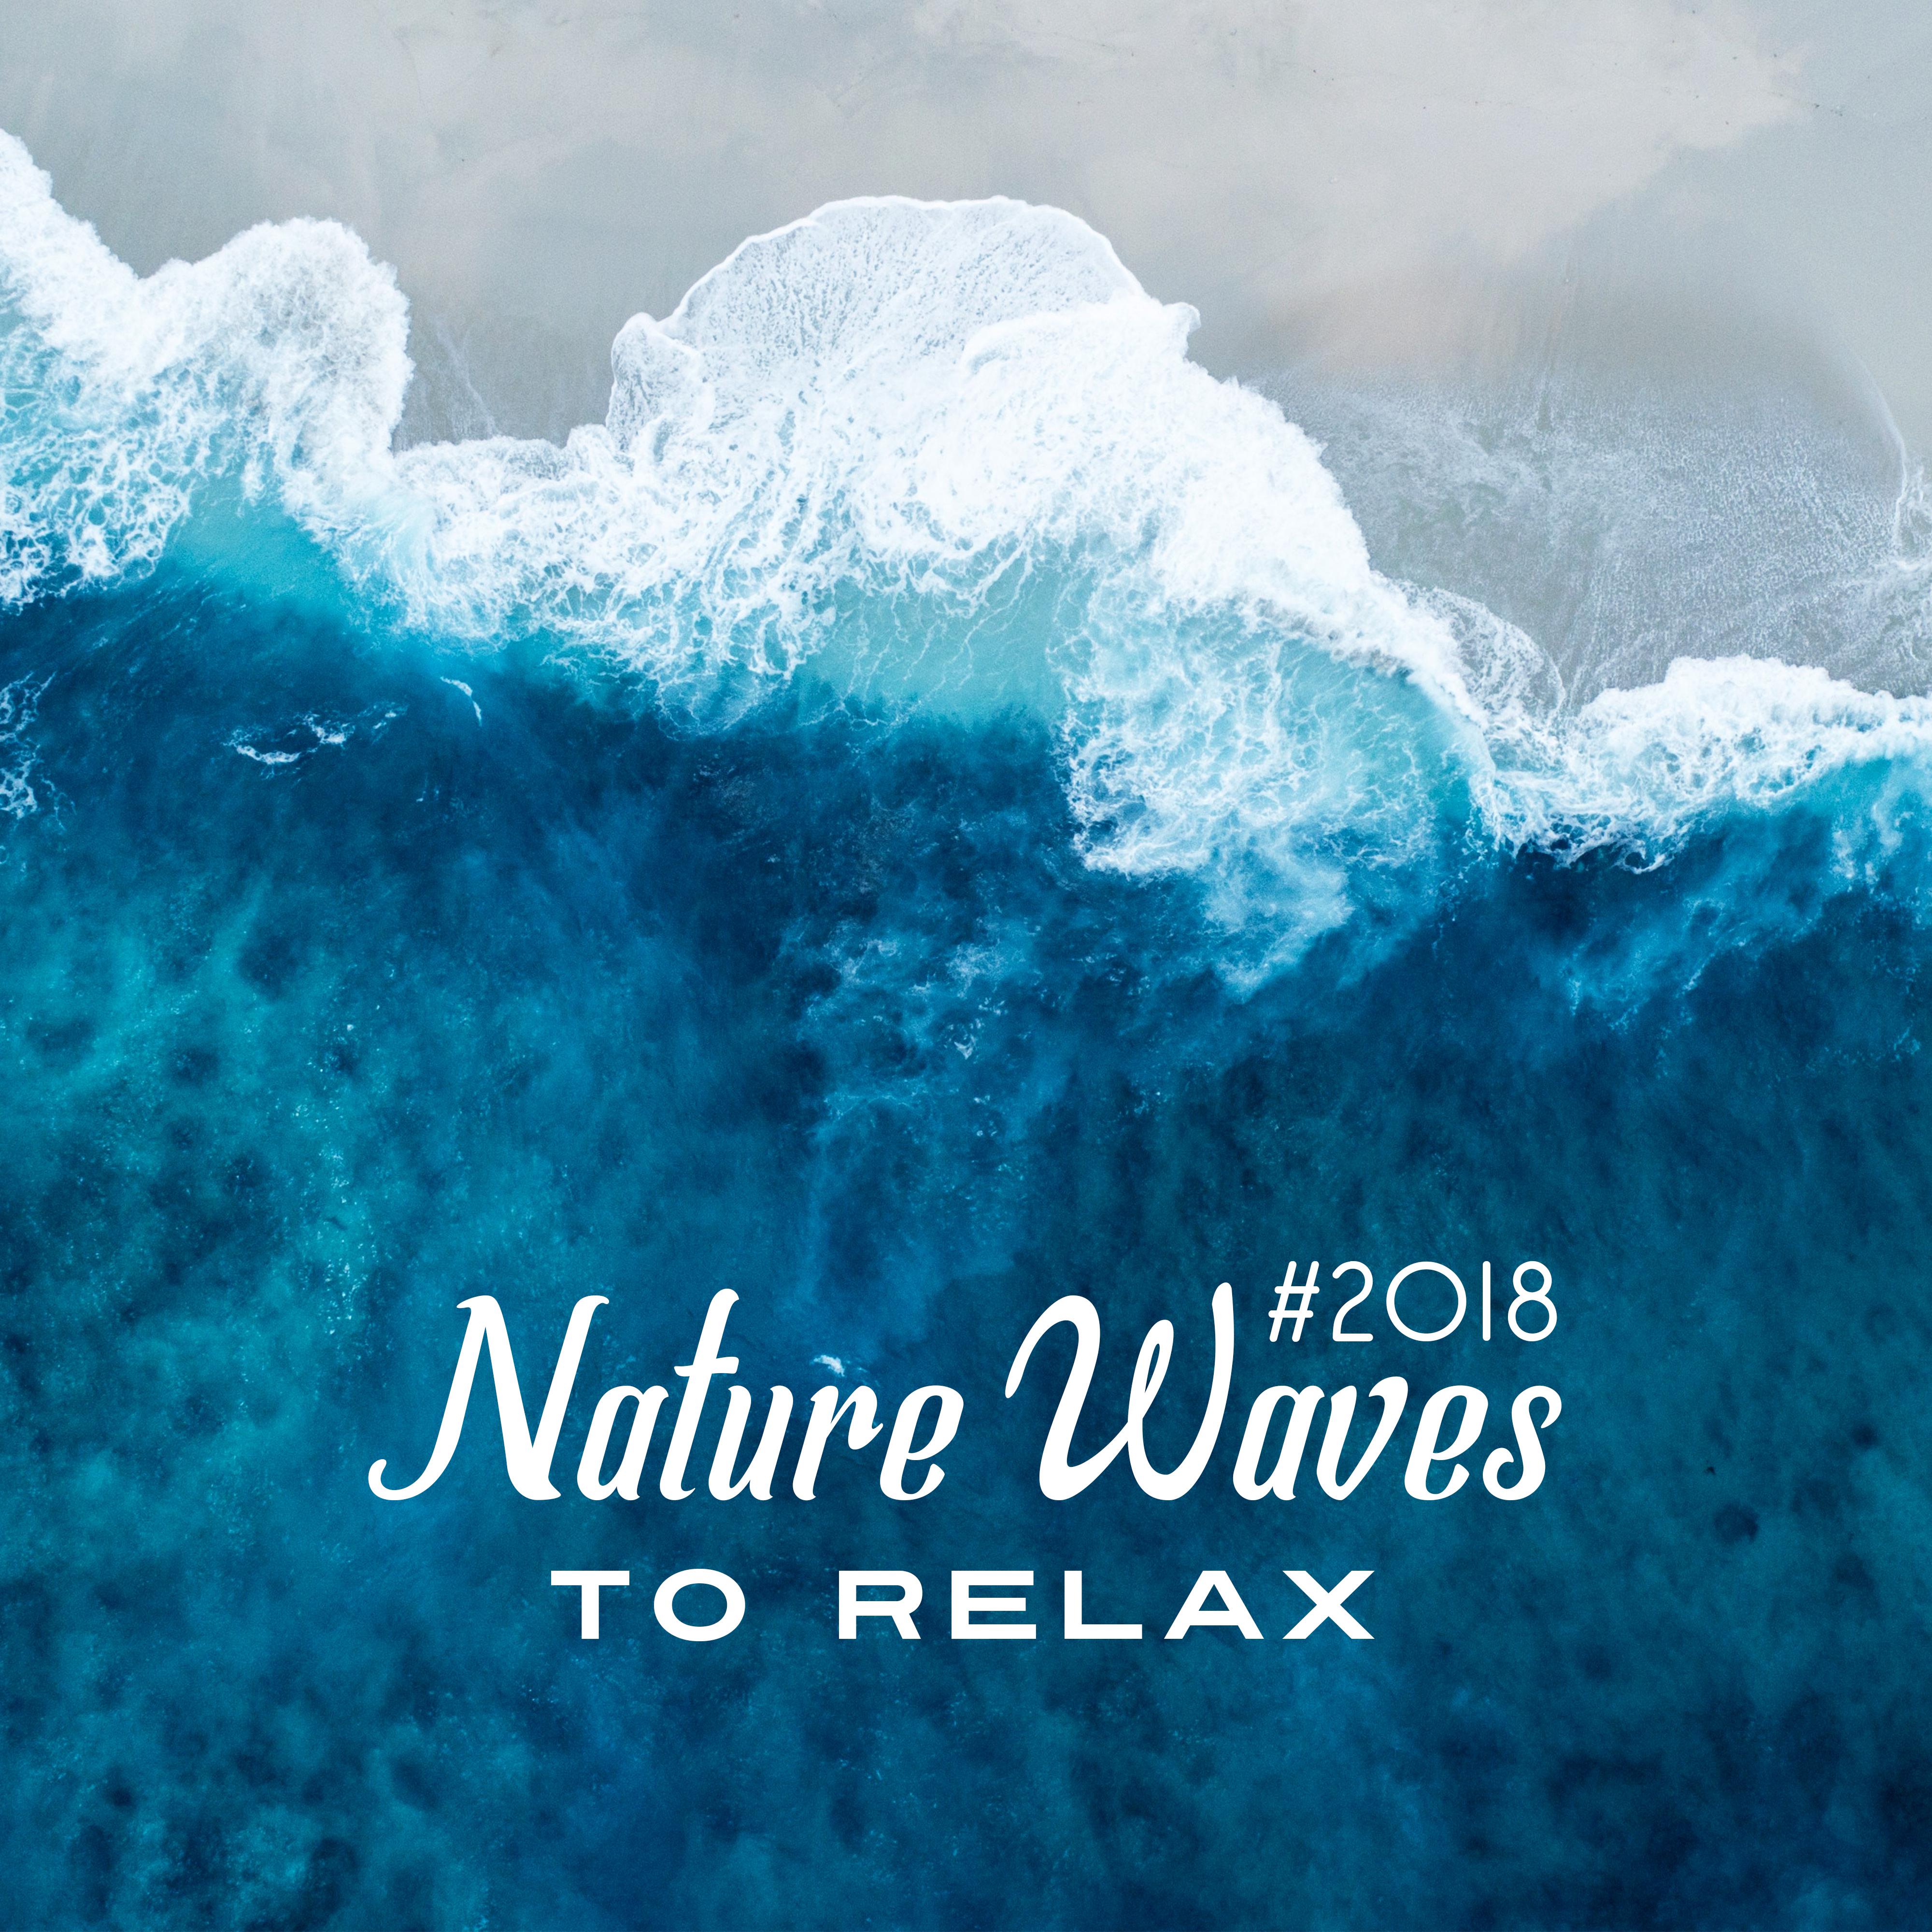 #2018 Nature Waves to Relax